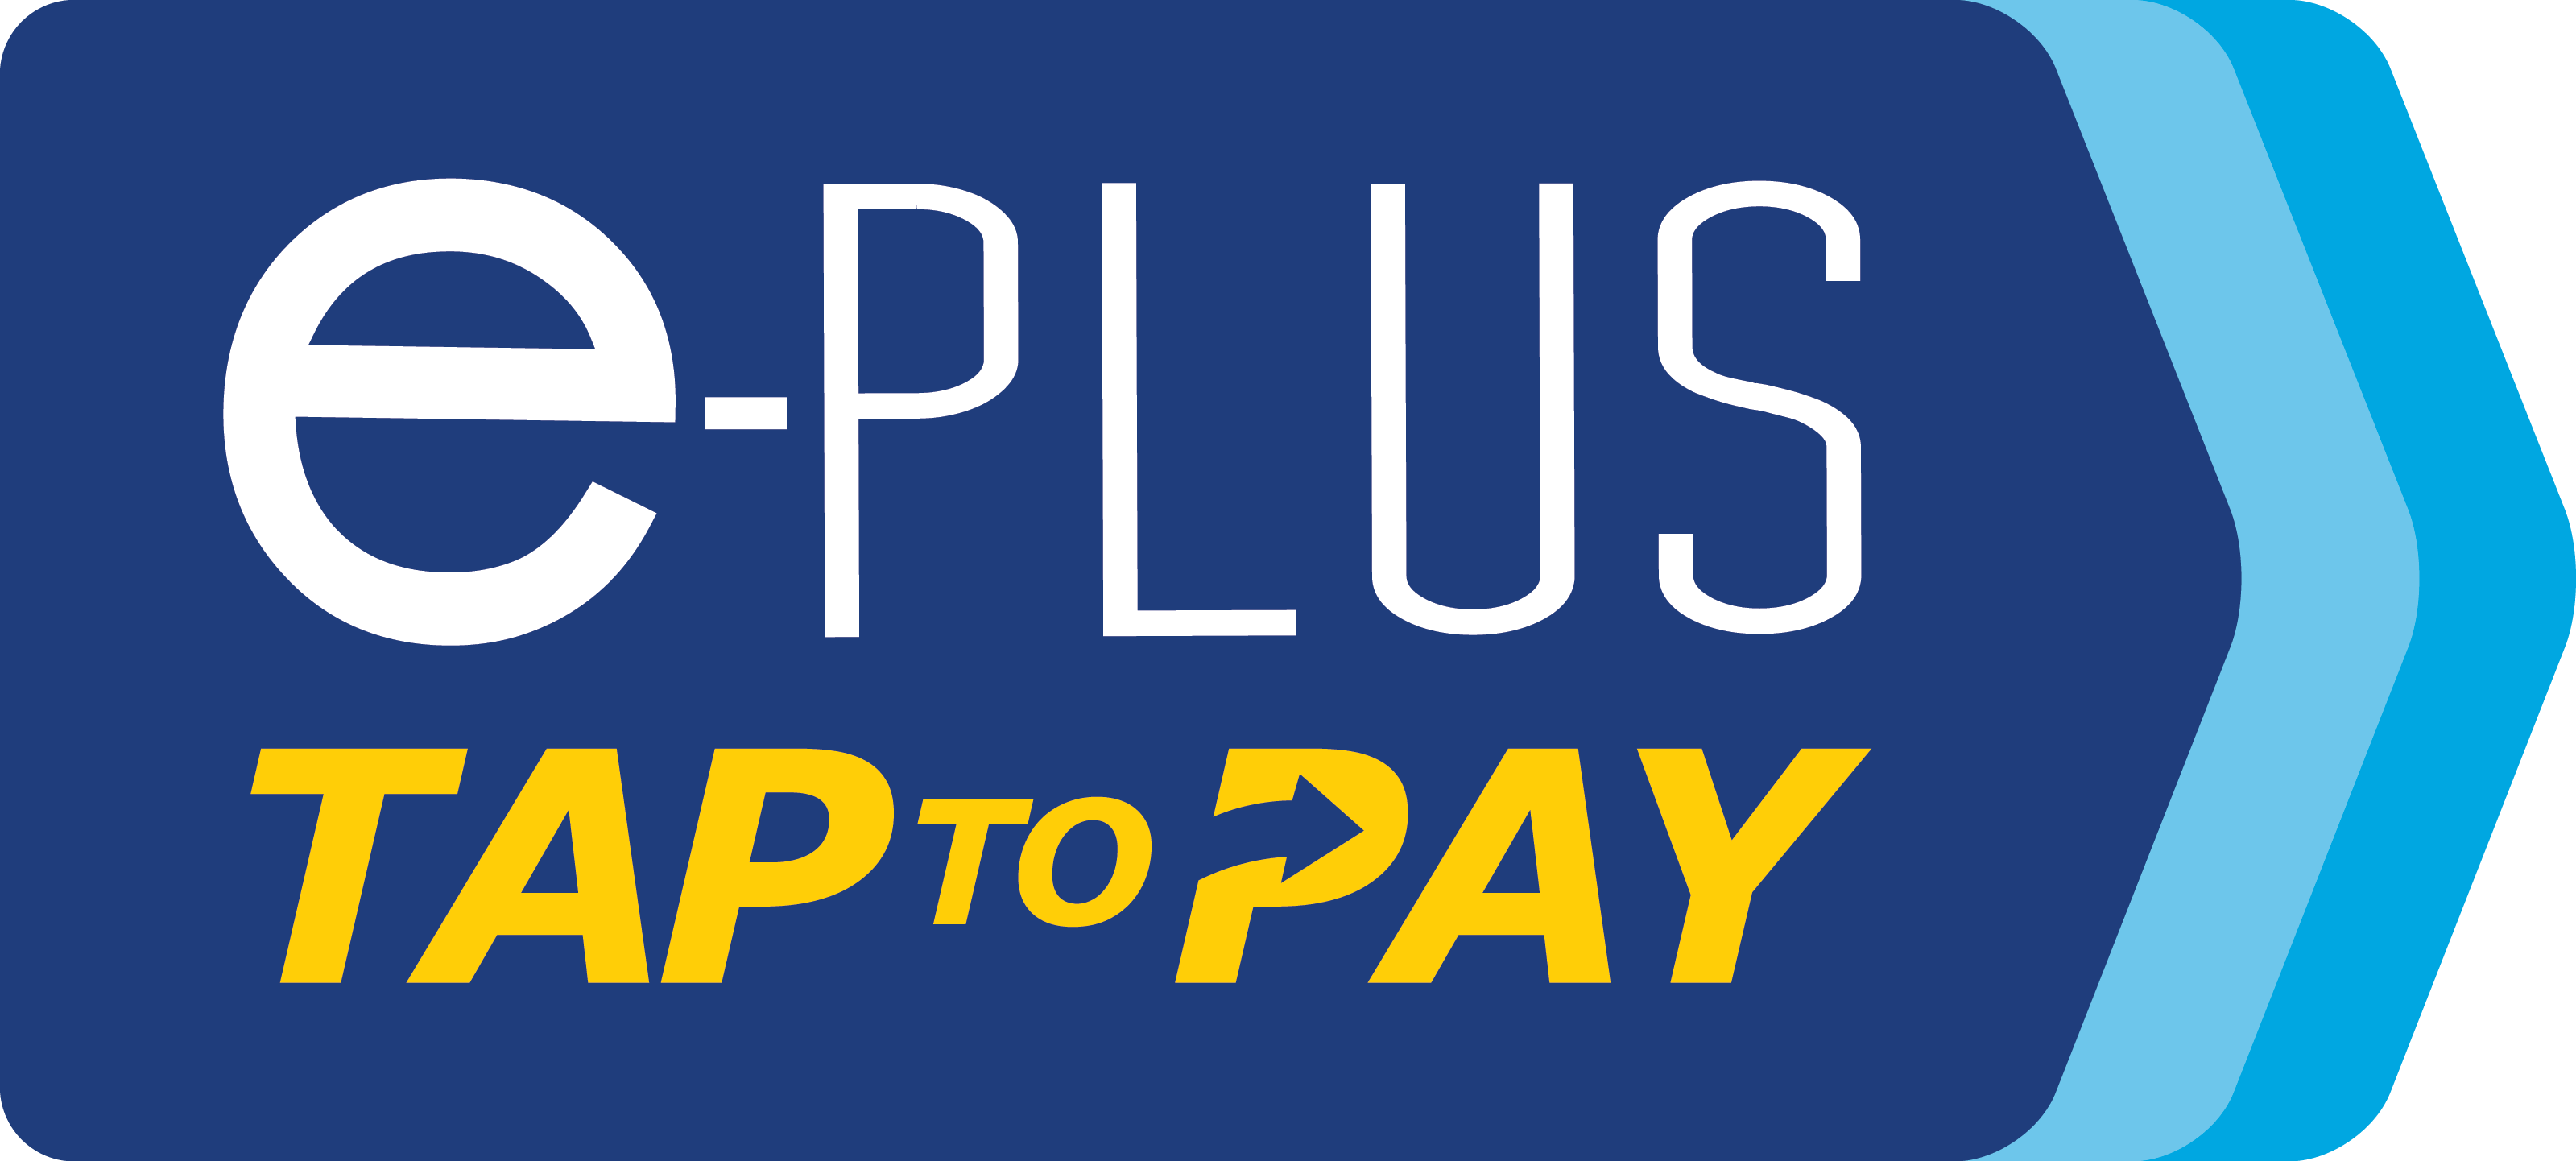 Tap to Pay Logo - SM Launches e-Plus Tap to Pay Stored Value Card - HardwareZone.com.ph